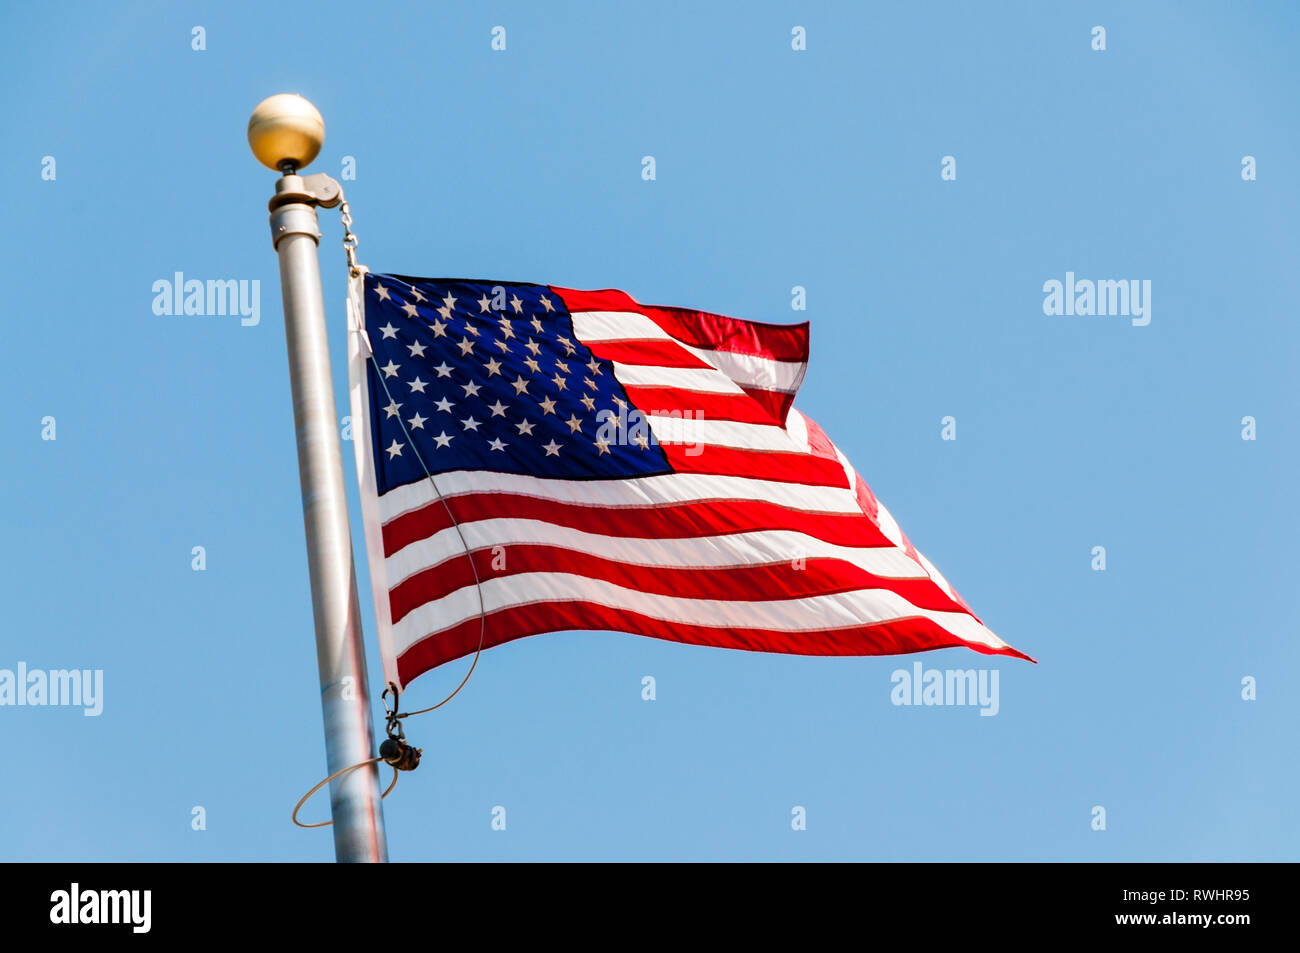 The American flag or stars and stripes flying against a blue sky. Stock Photo